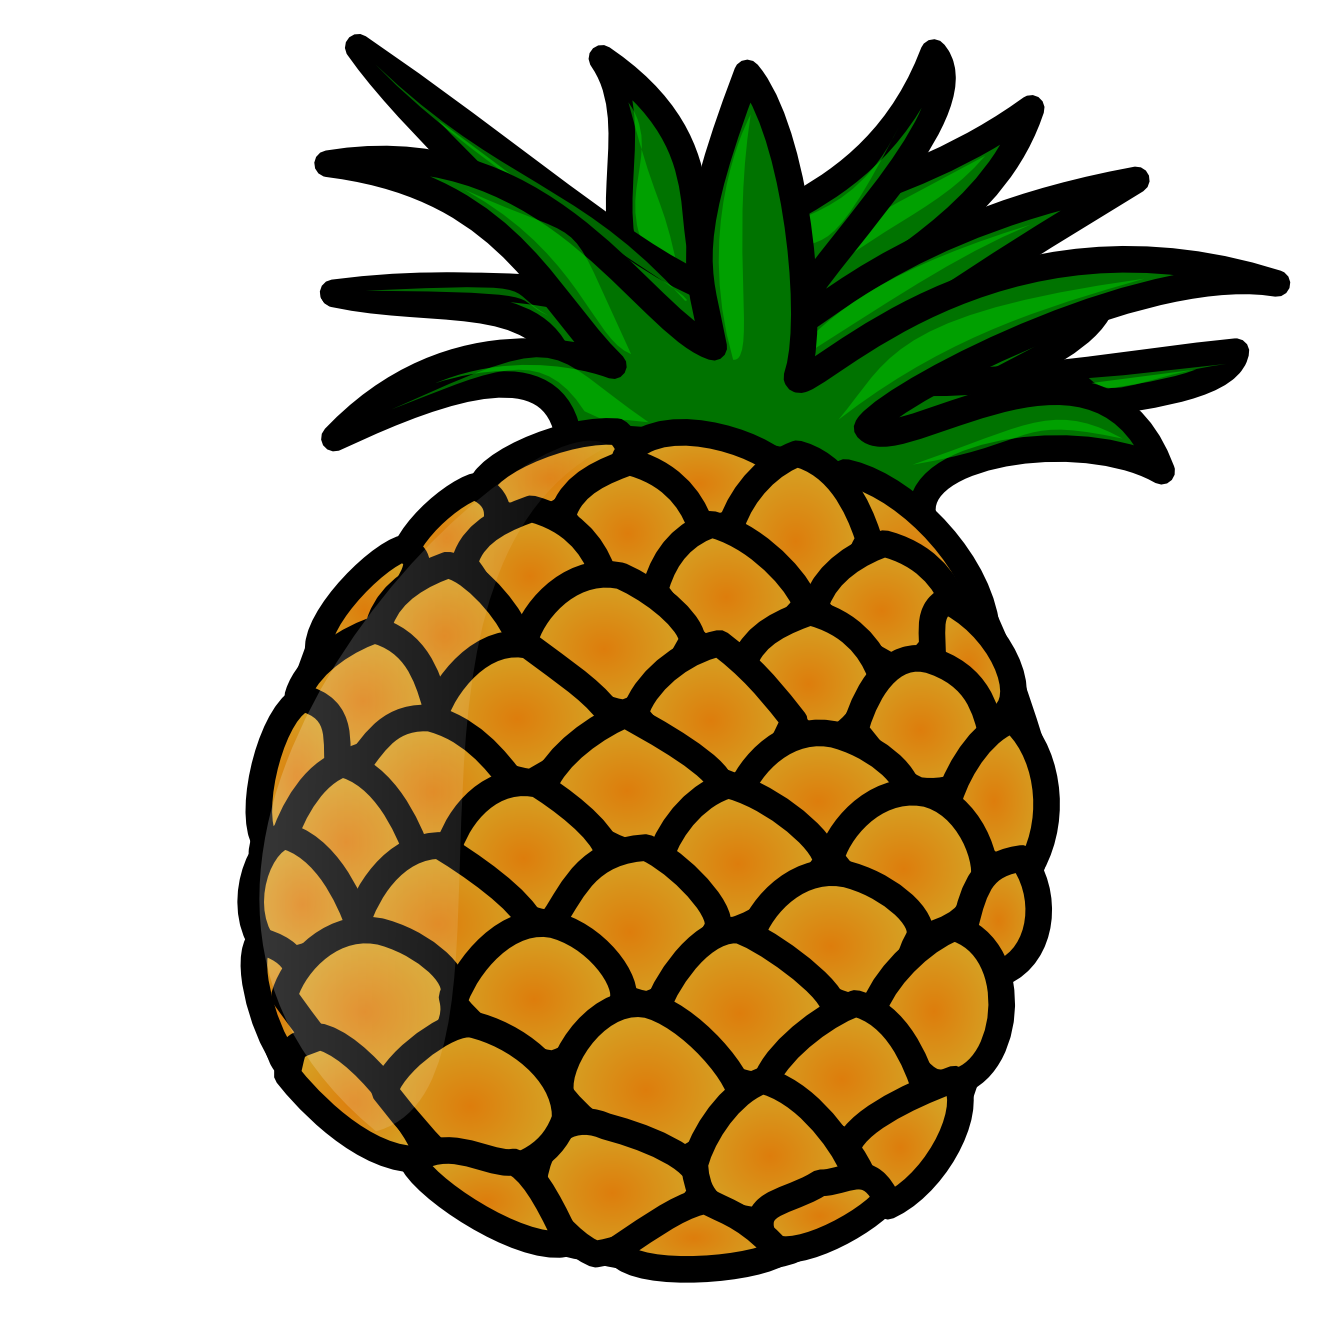 Pineapple Clip Art Black And White - Free Clipart ...